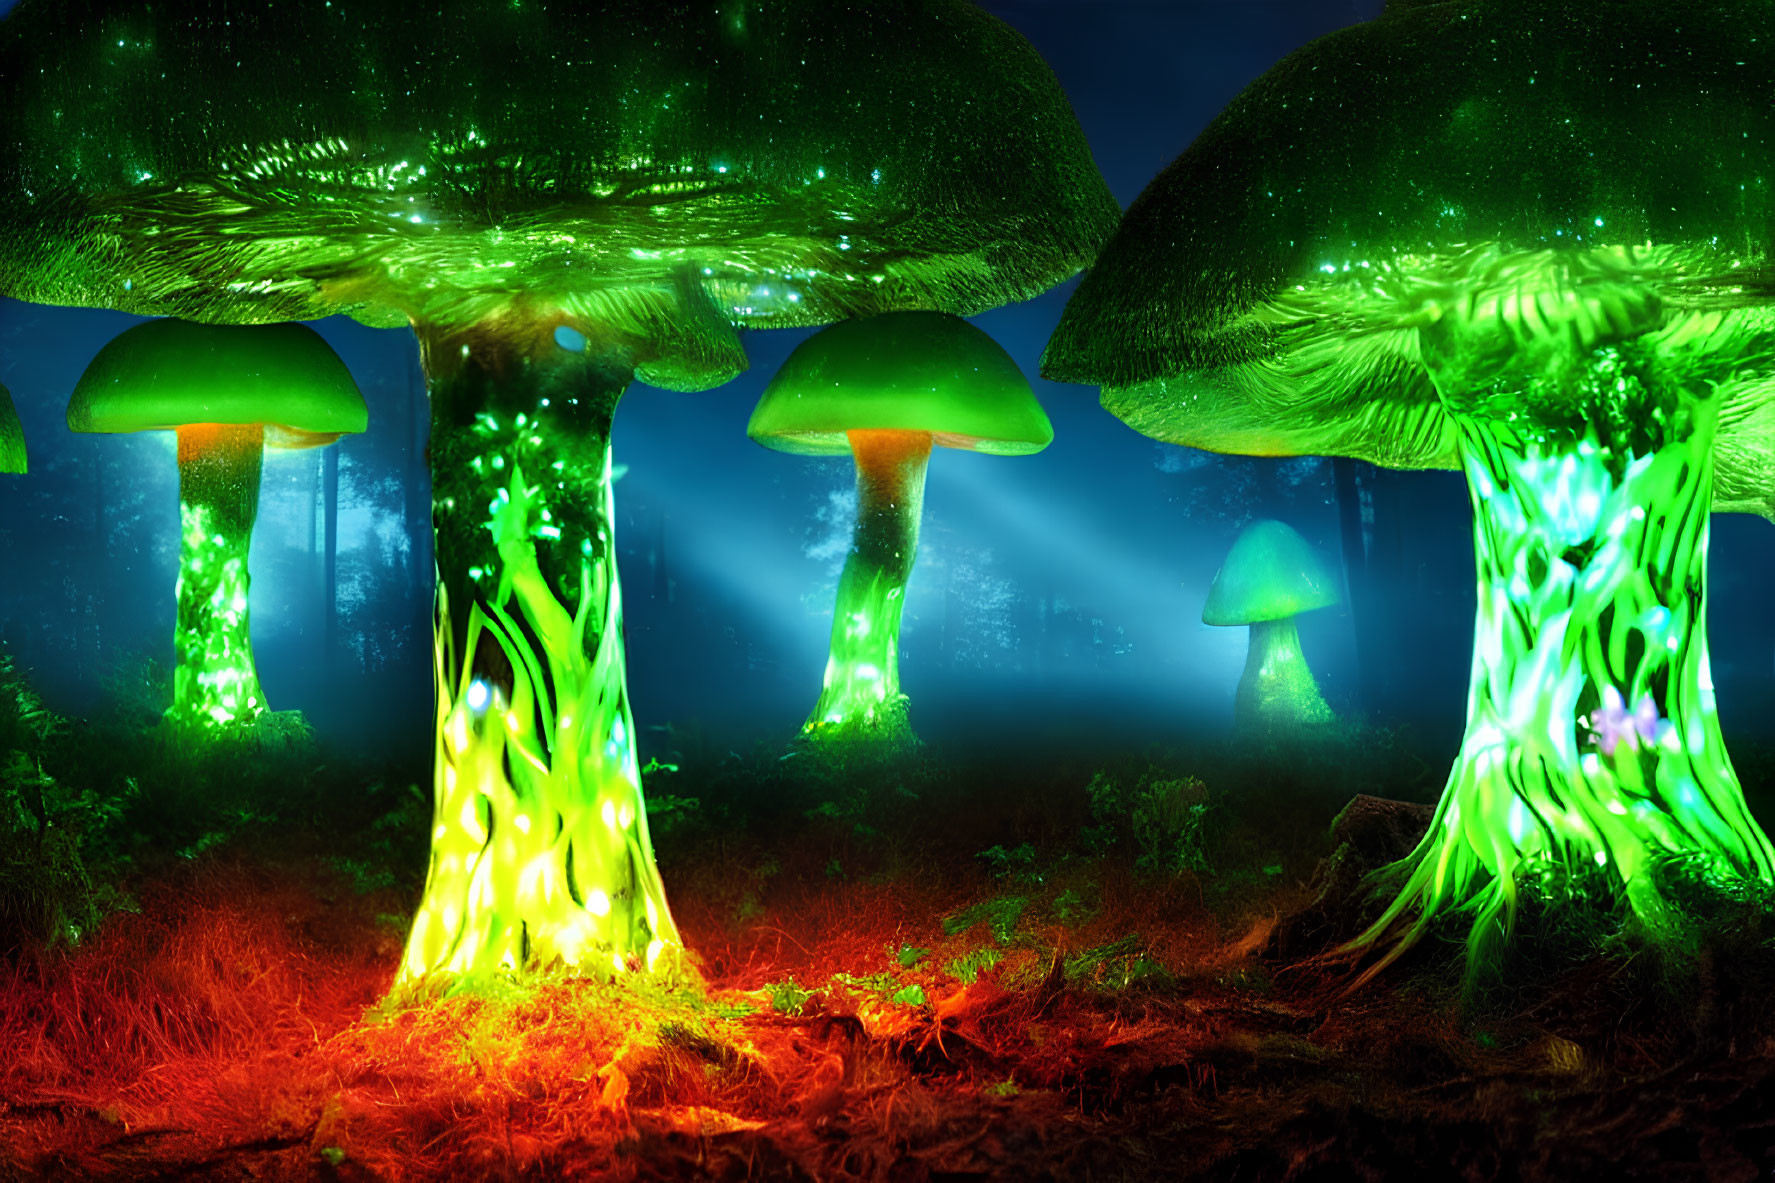 Bioluminescent mushrooms in mystical forest with vivid green light